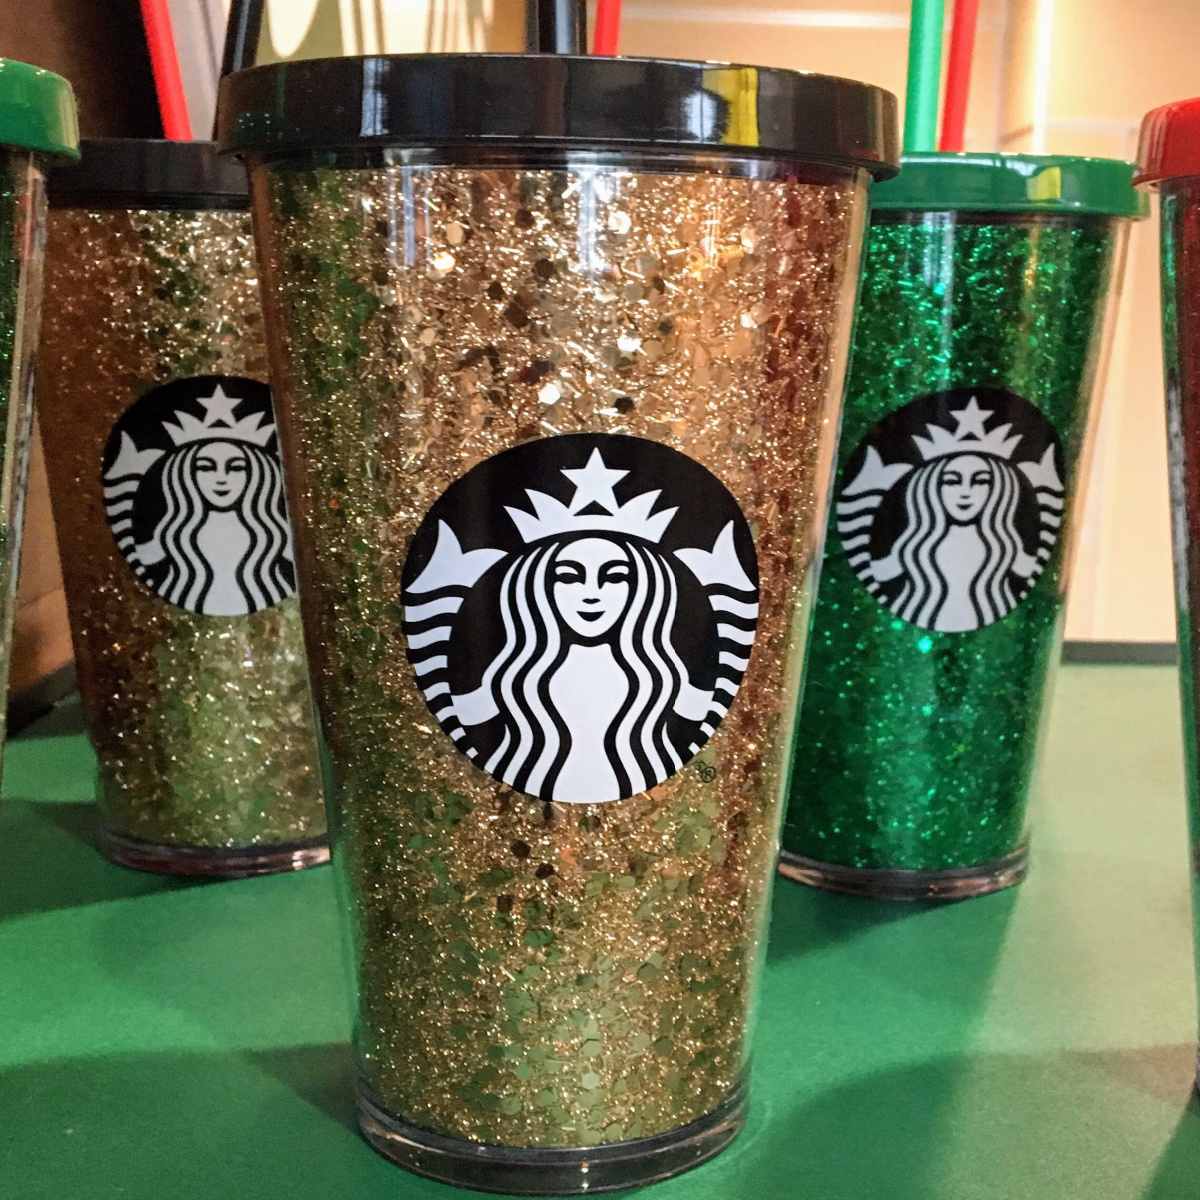 New Starbucks Holiday Cups Revealed for 2022 - May Sell Out!